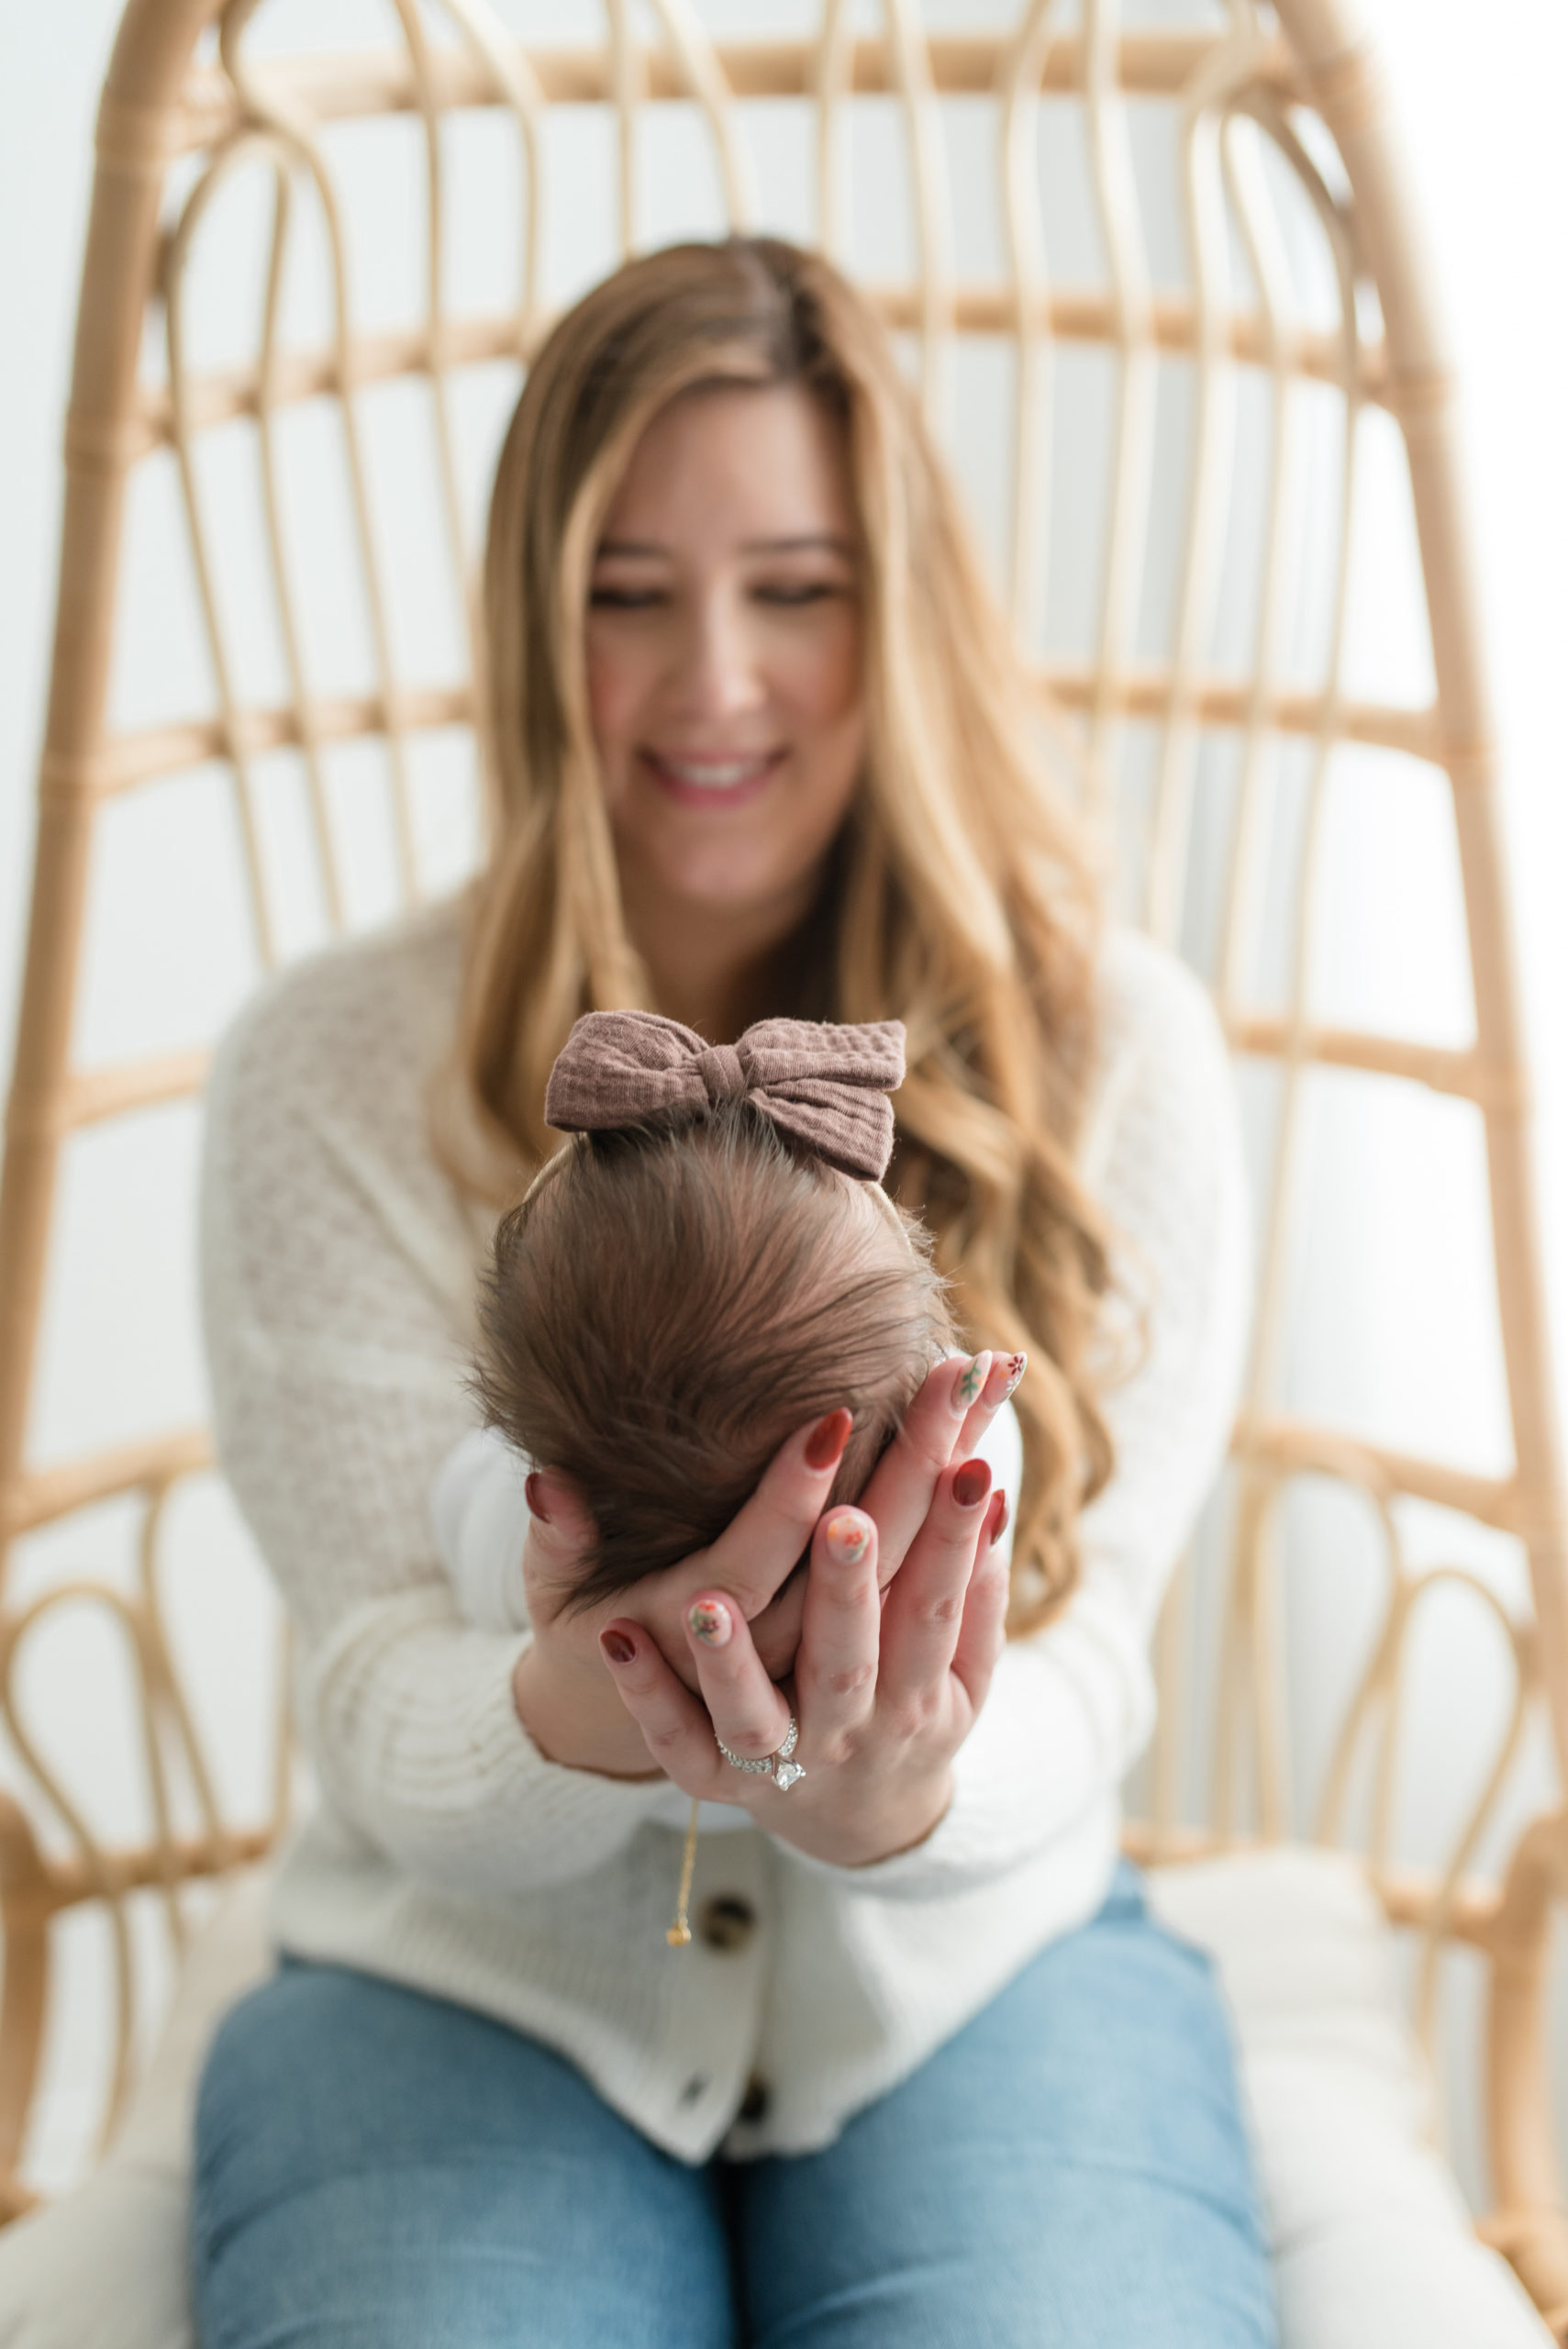 Mom holding baby girl in her hands at an in-studi newborn session. Photographed by Dallas newborn photographer Lindsey Dutton Photography